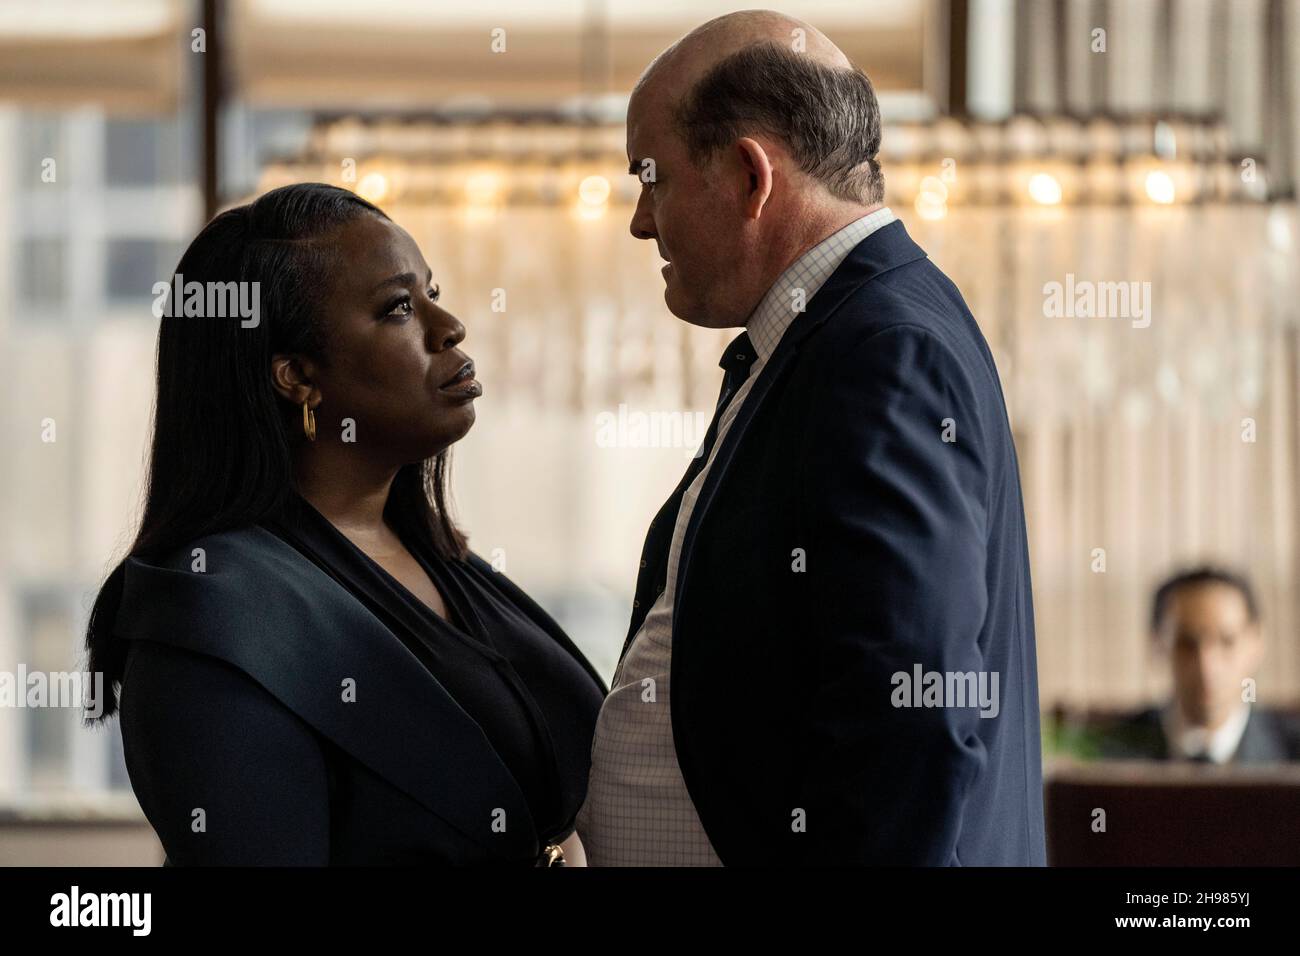 DAVID KOECHNER and UZO ADUBA in NATIONAL CHAMPIONS (2021), directed by RIC ROMAN WAUGH. Credit: Thunder Road Pictures / Album Stock Photo